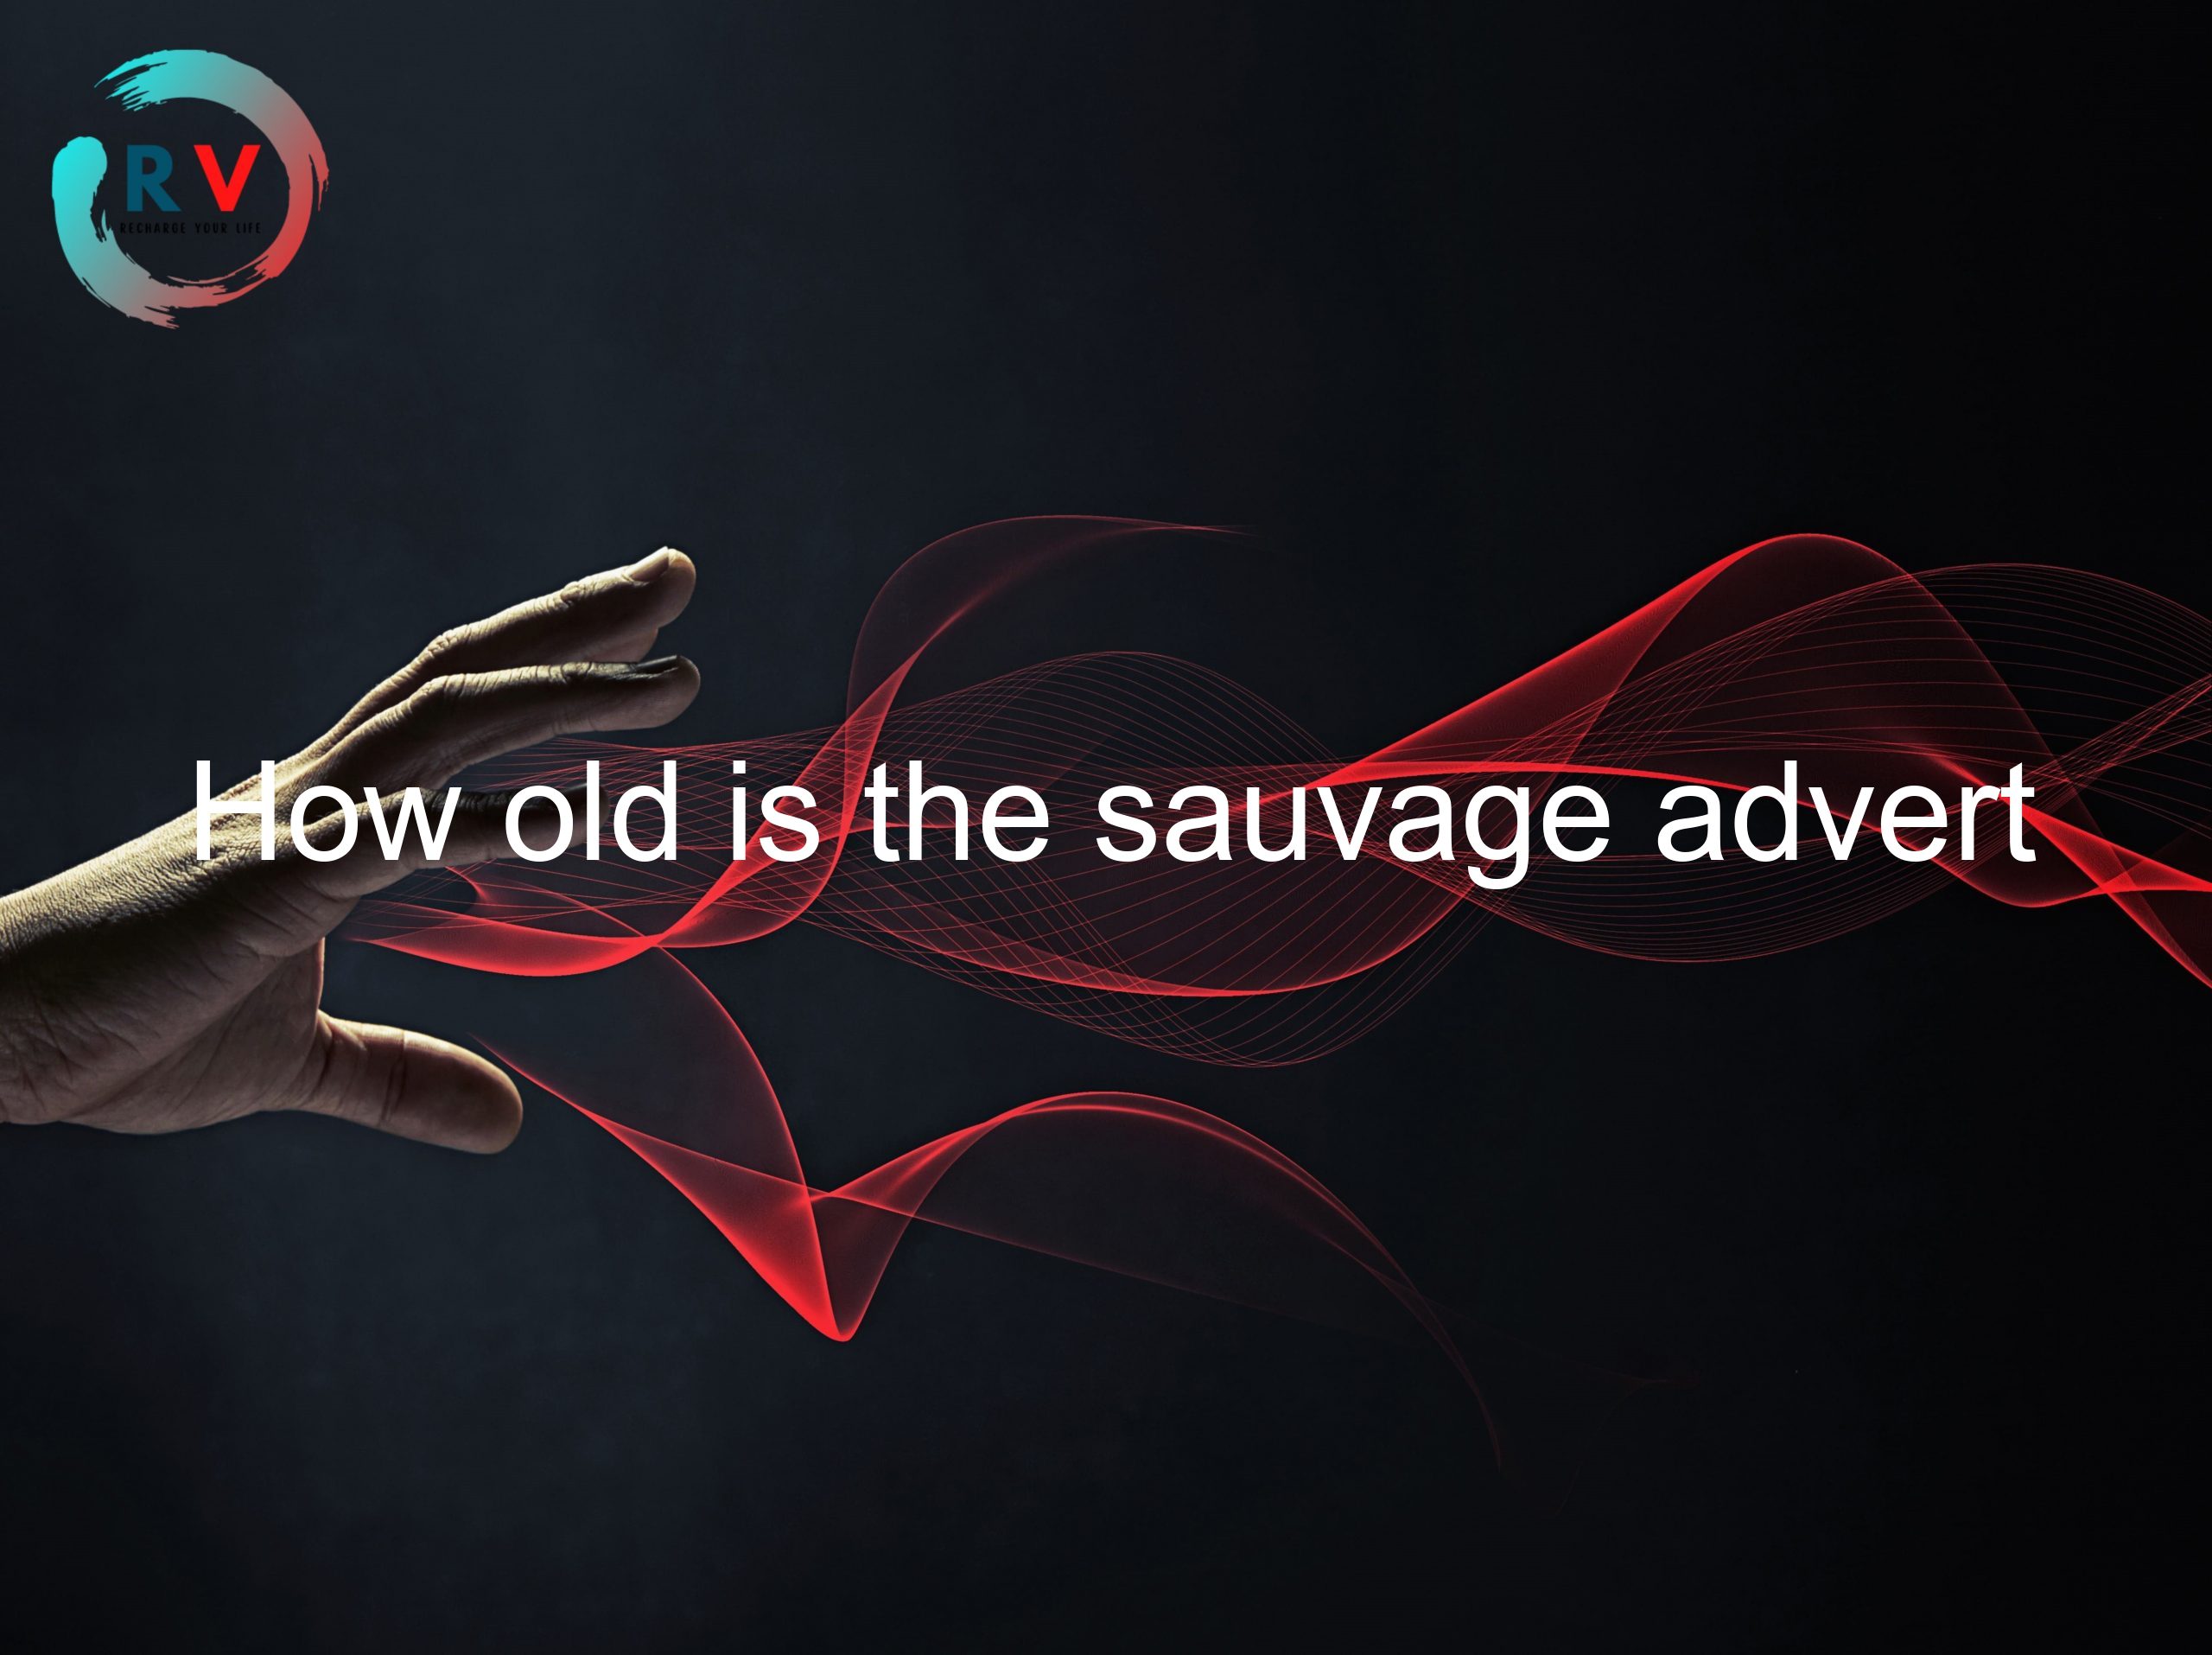 How old is the sauvage advert